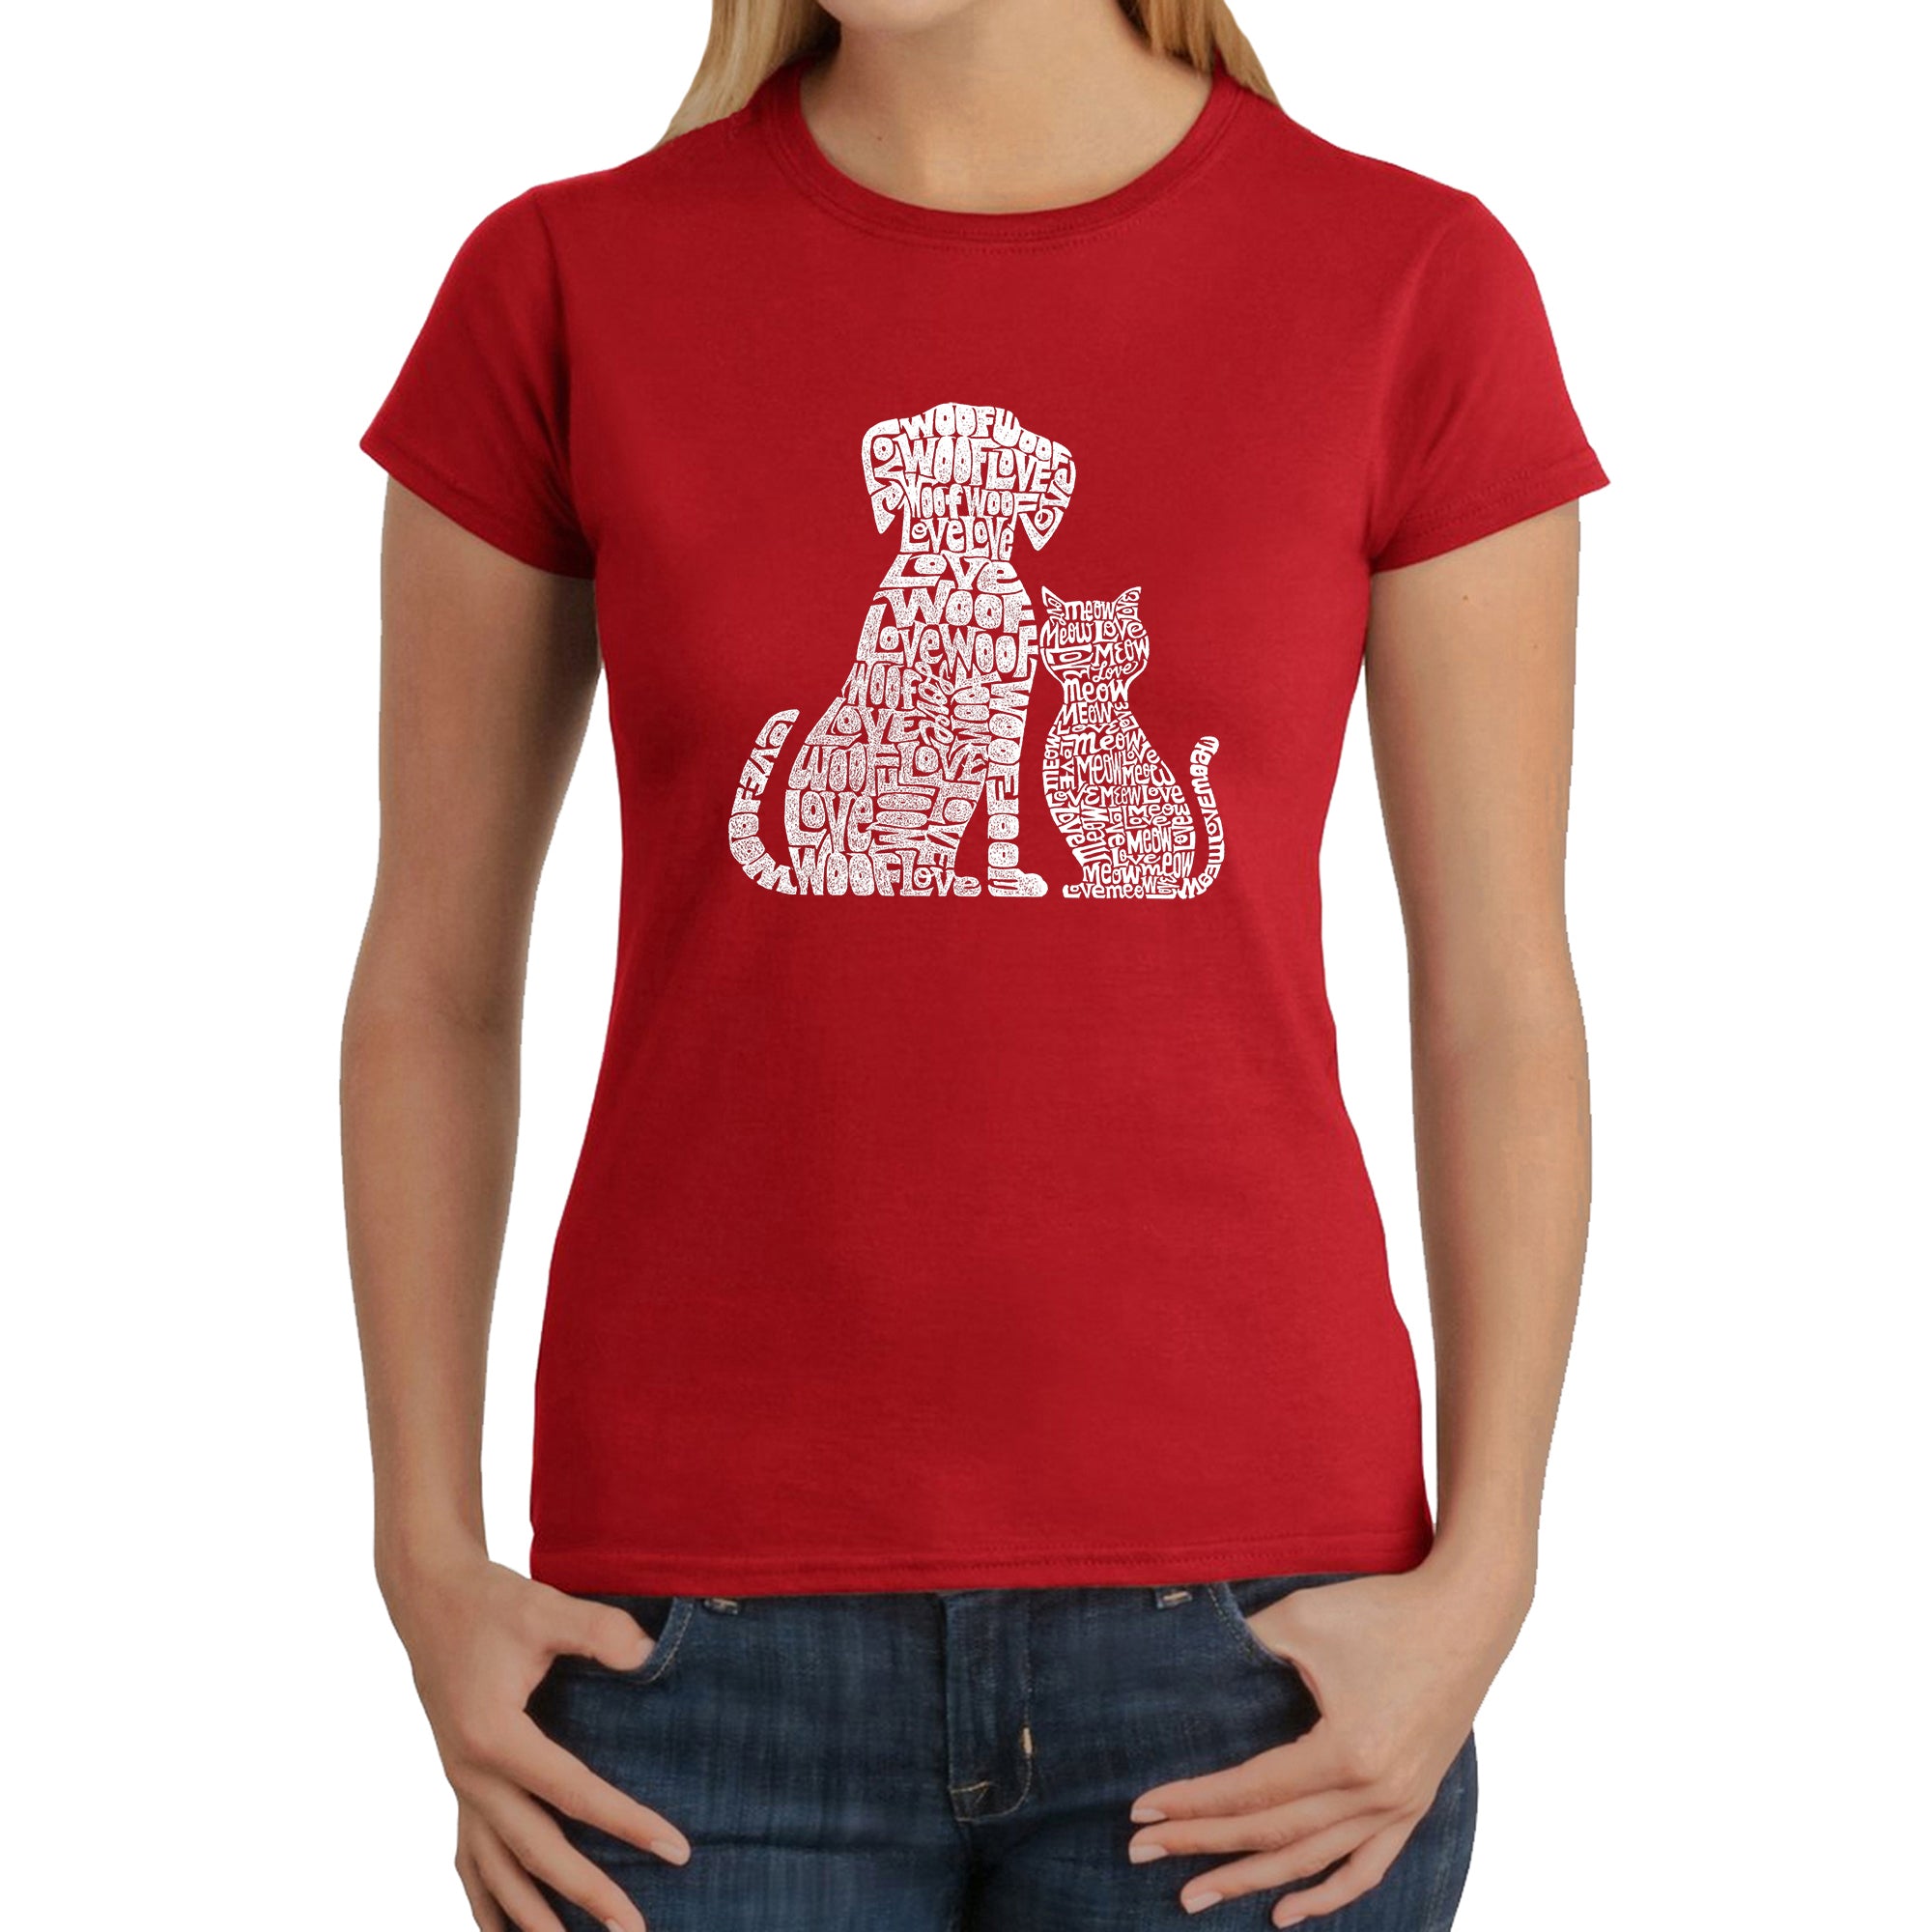 Dogs And Cats - Women's Word Art T-Shirt - Red - Small